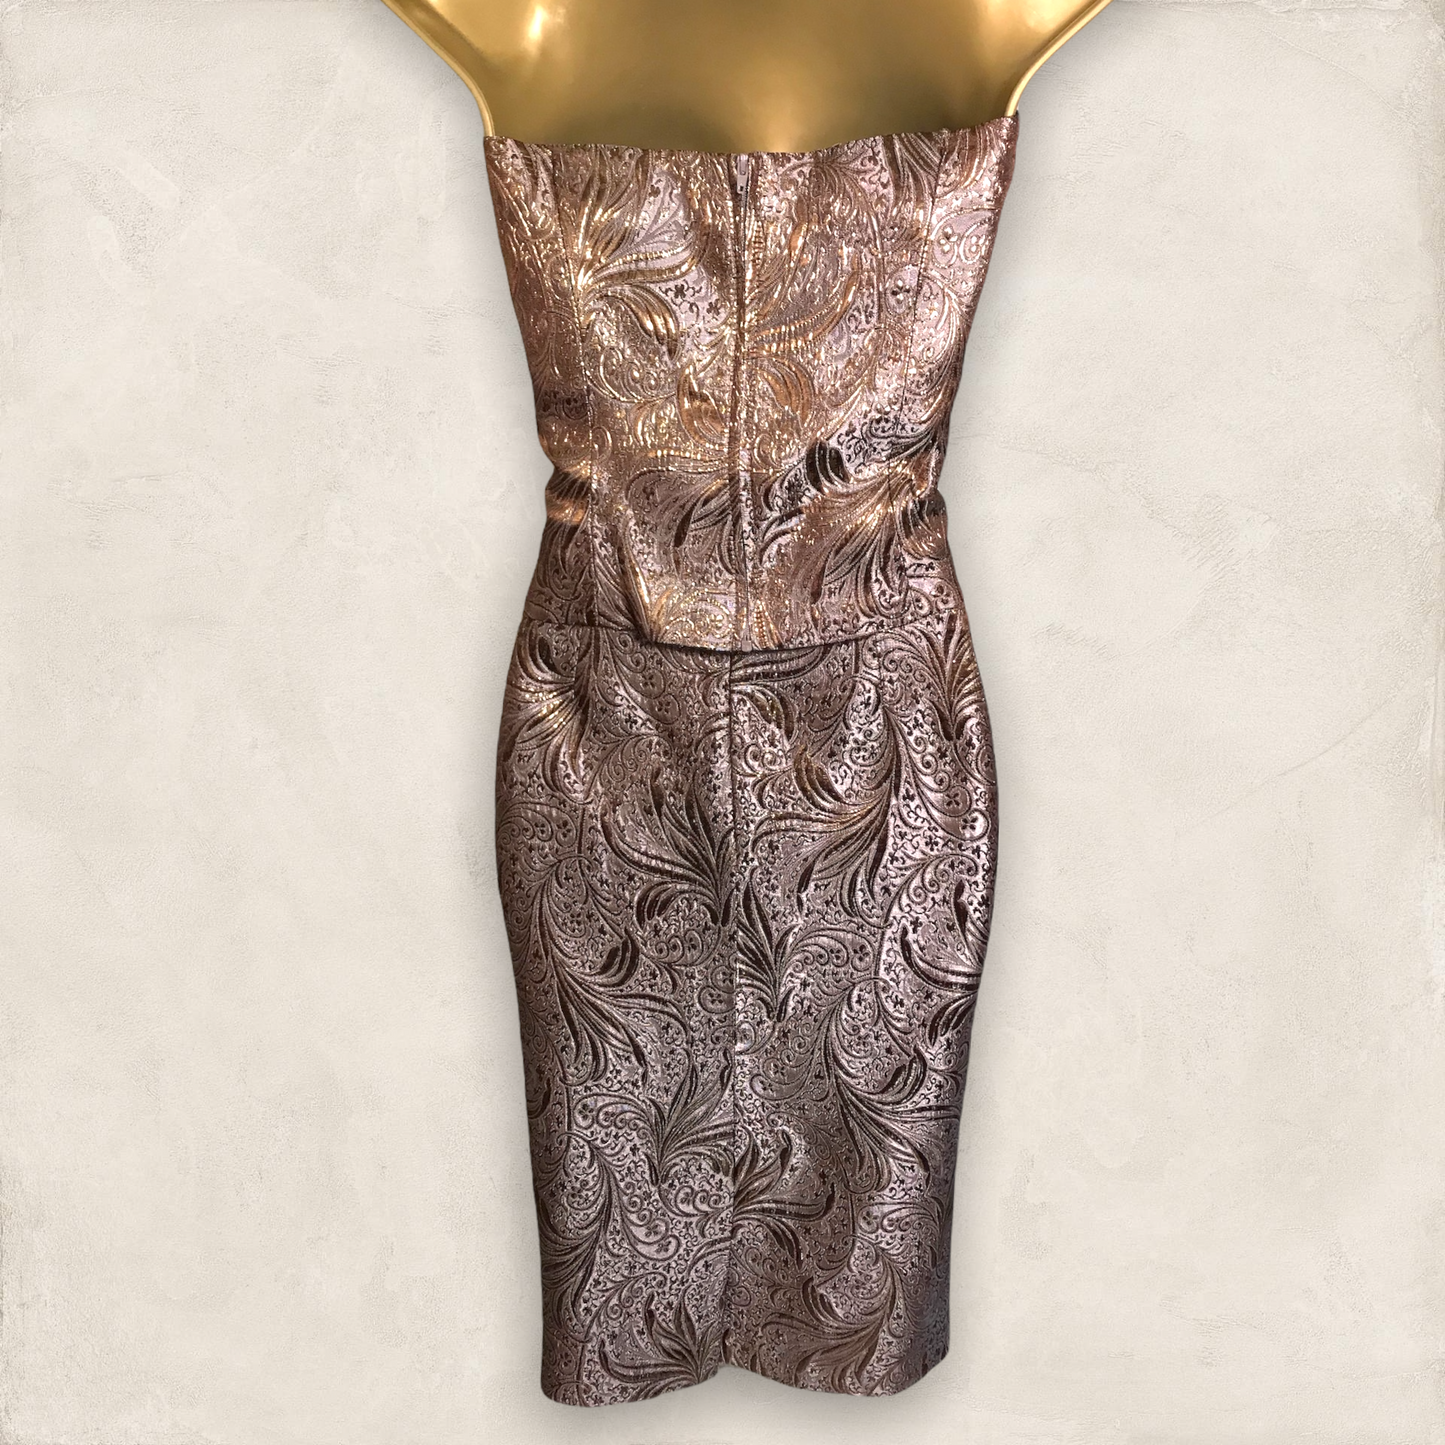 Next Bronze Gold Vintage Jacquard Metallic Special Occasion Outfit UK 8 US 6 EU 36 Timeless Fashions